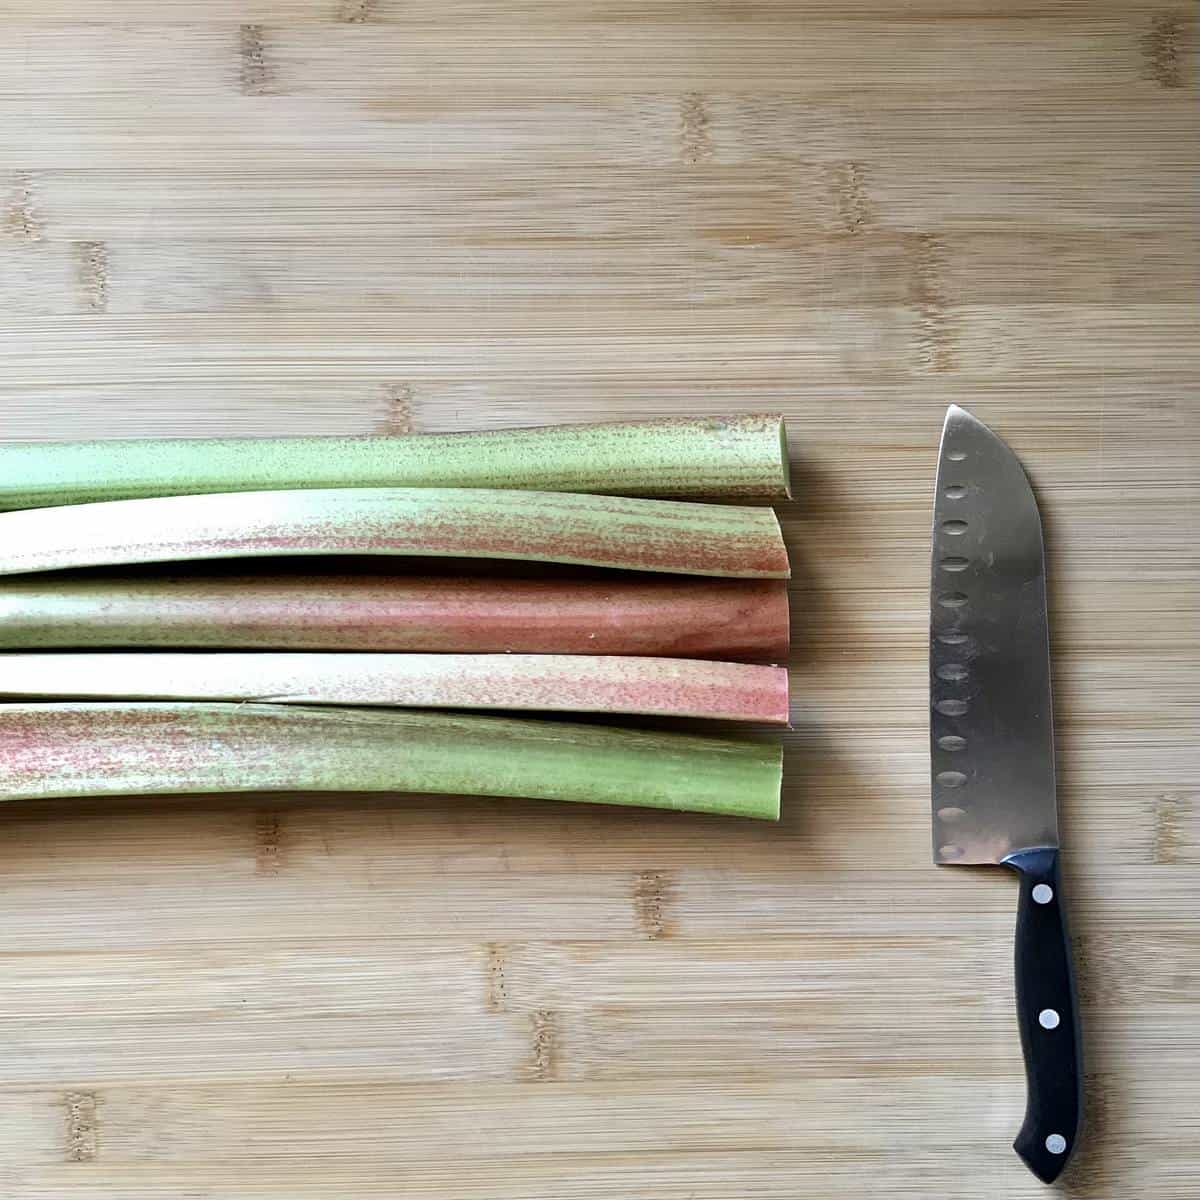 Rhubarb stalks next to a knife, lined up to get cut. 